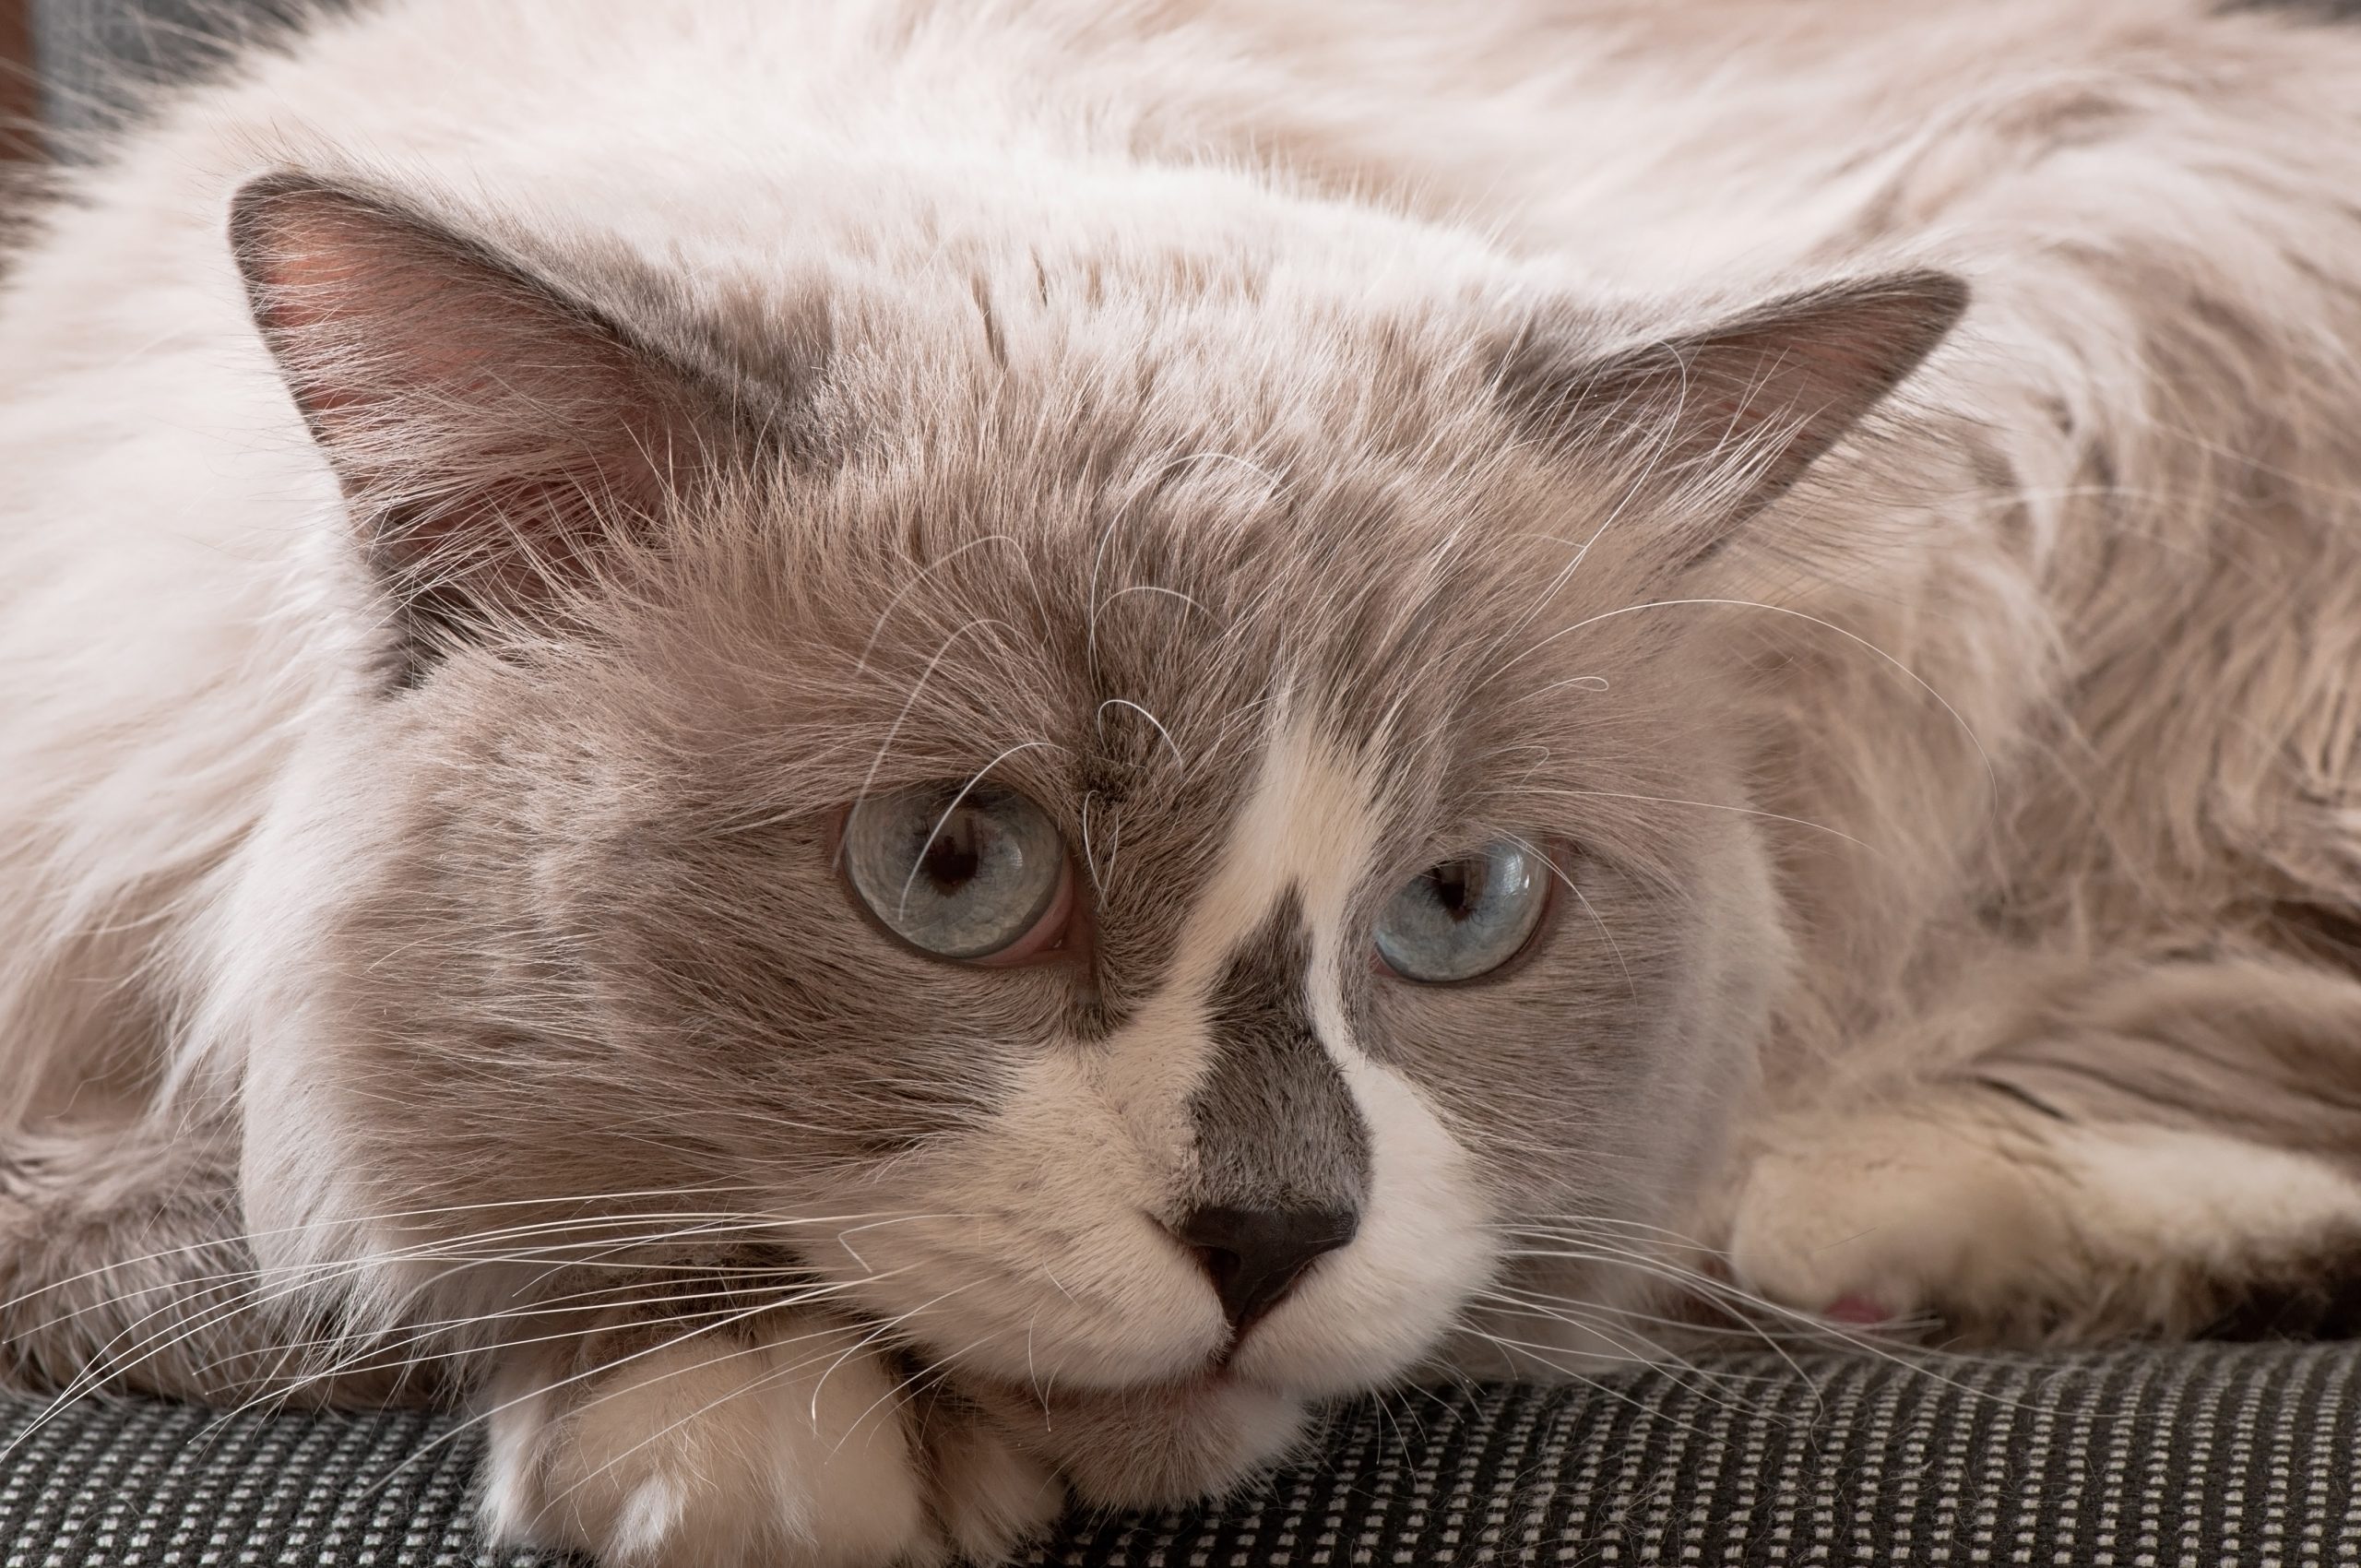 Ragdoll, Maine Coons and British Shorthair cats are amongst the breeds predisposed to HCM